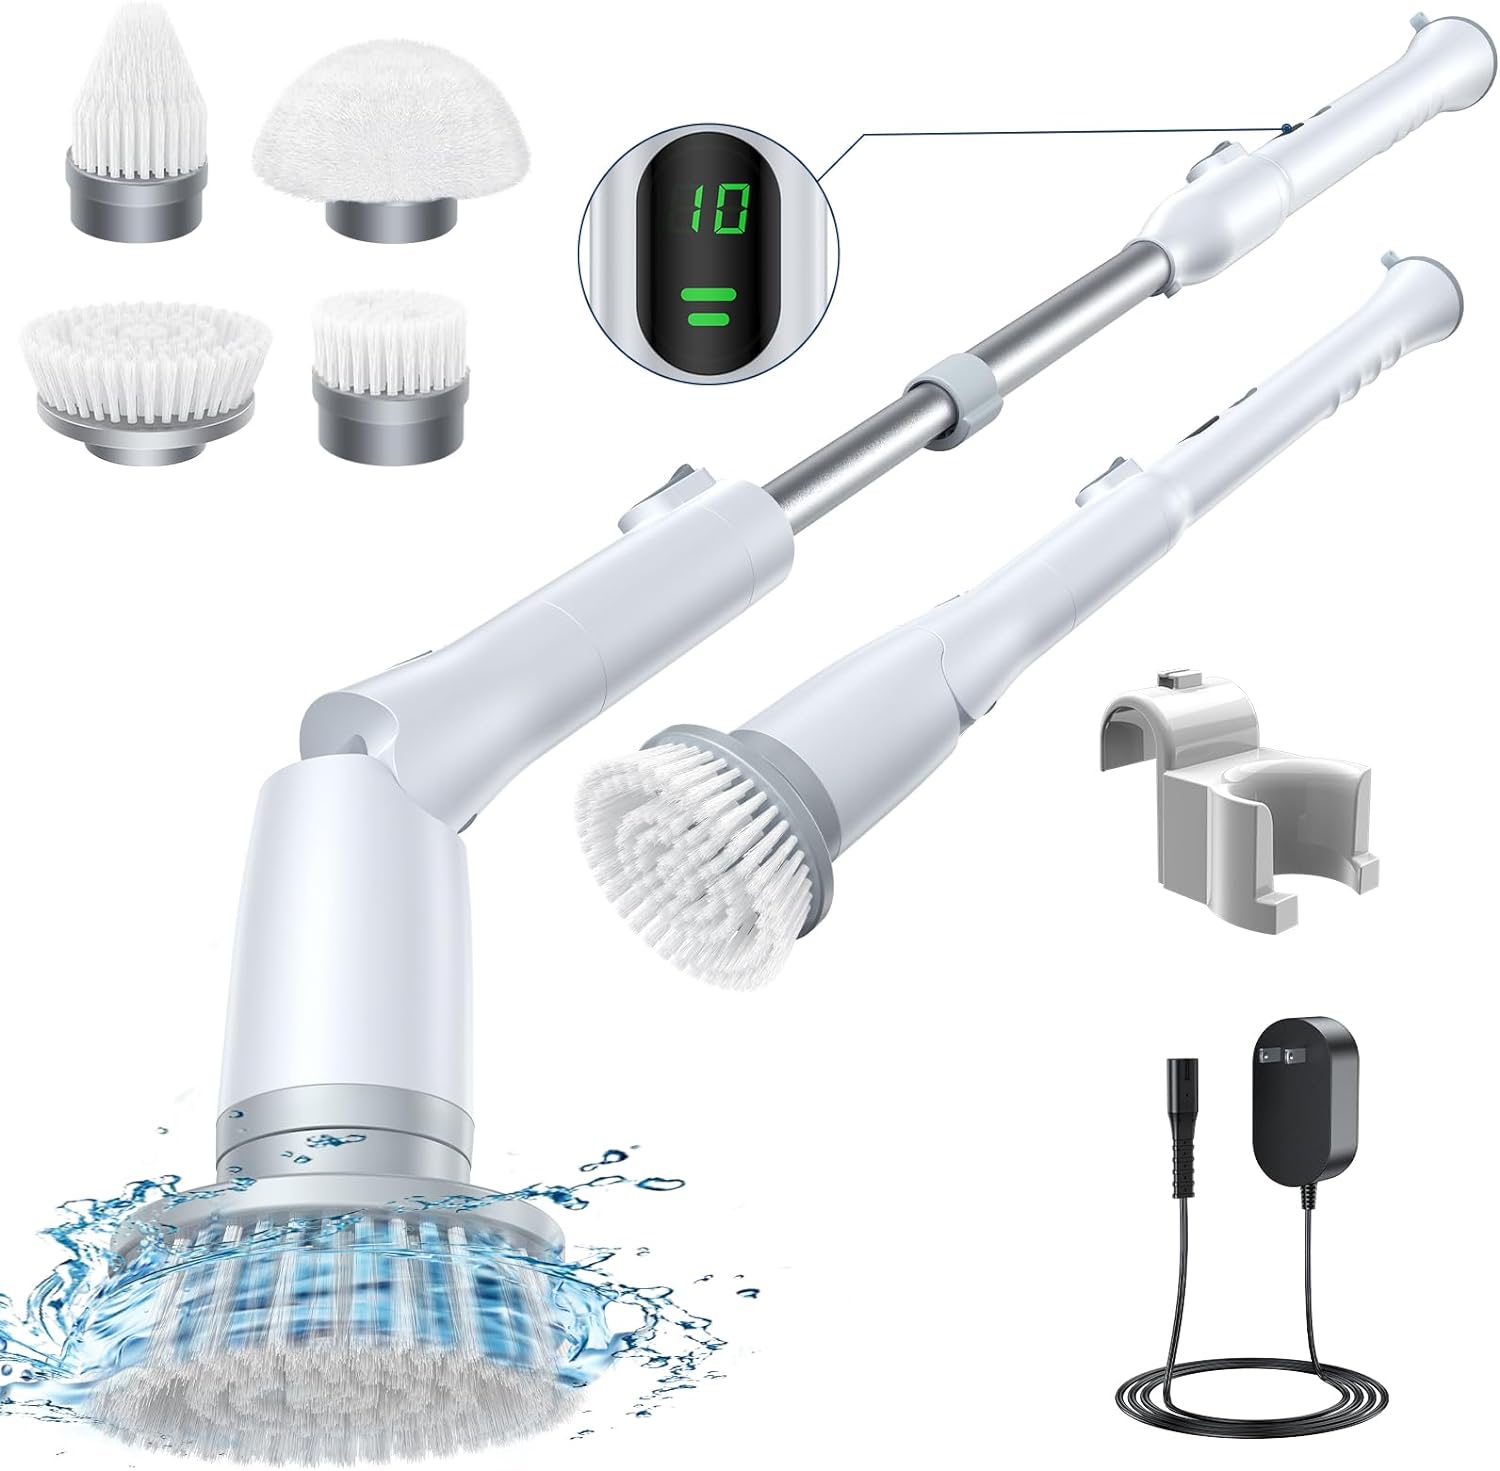 Special Discounts Available - LABIGO Electric Spin Scrubber LA2 Pro, Shower Power Cleaning Brush with Display and 4 Replaceable Heads